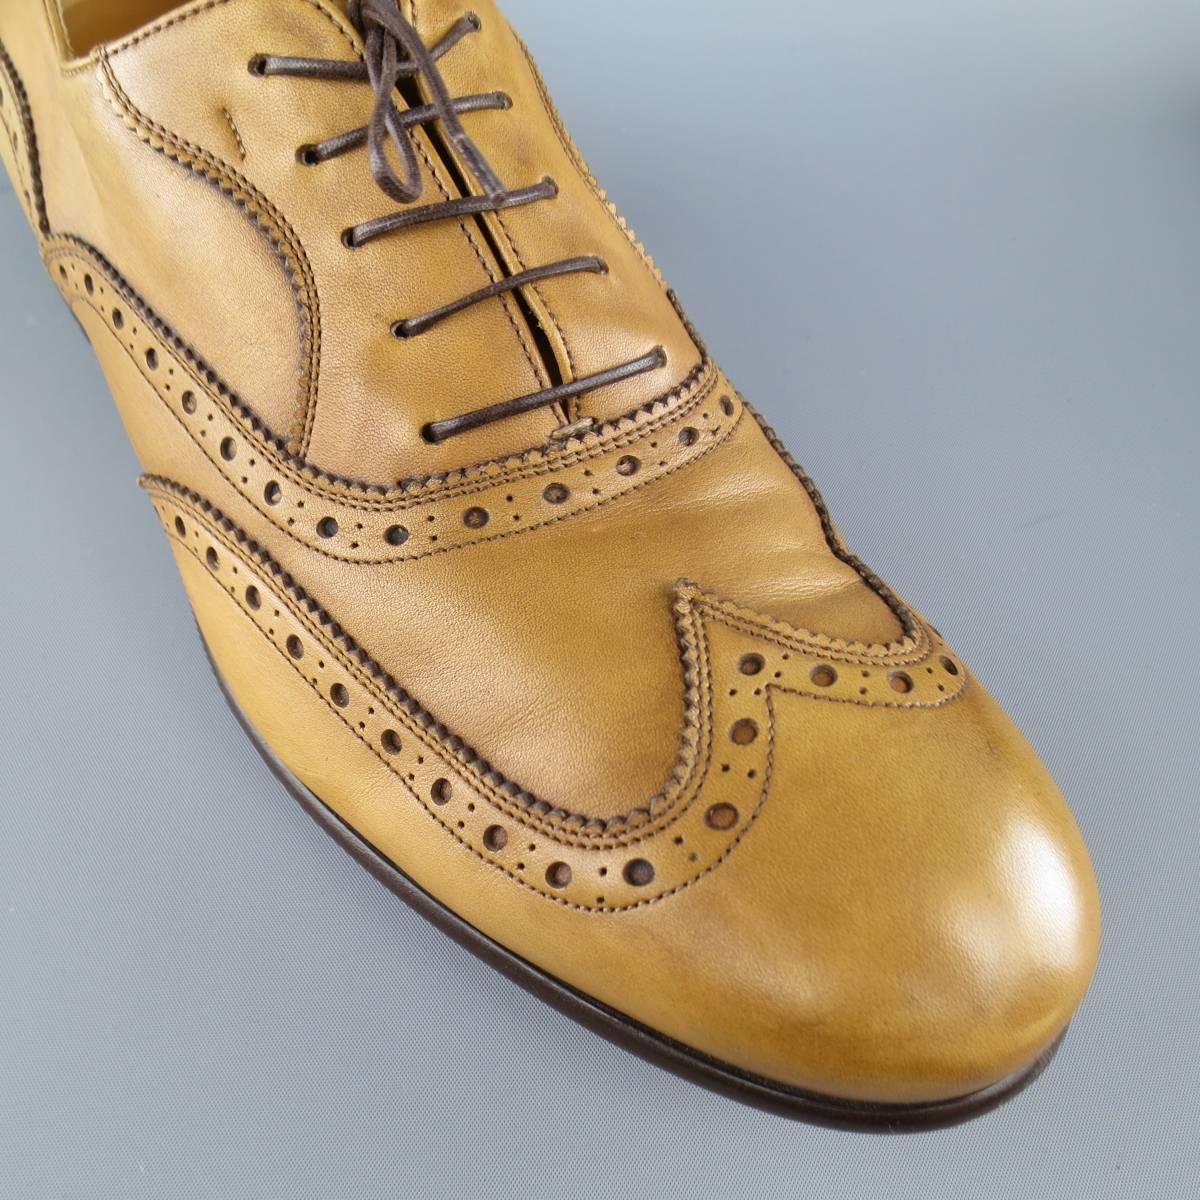 SALVATORE FERRAGAMO dress shoes in a light tan leather featuring perforated brogue detailing throughout and a wingtip toe. Made in Italy.
 
Good Pre-Owned Condition.
Marked:11
 
Outsole: 12.5 x 4 in.
